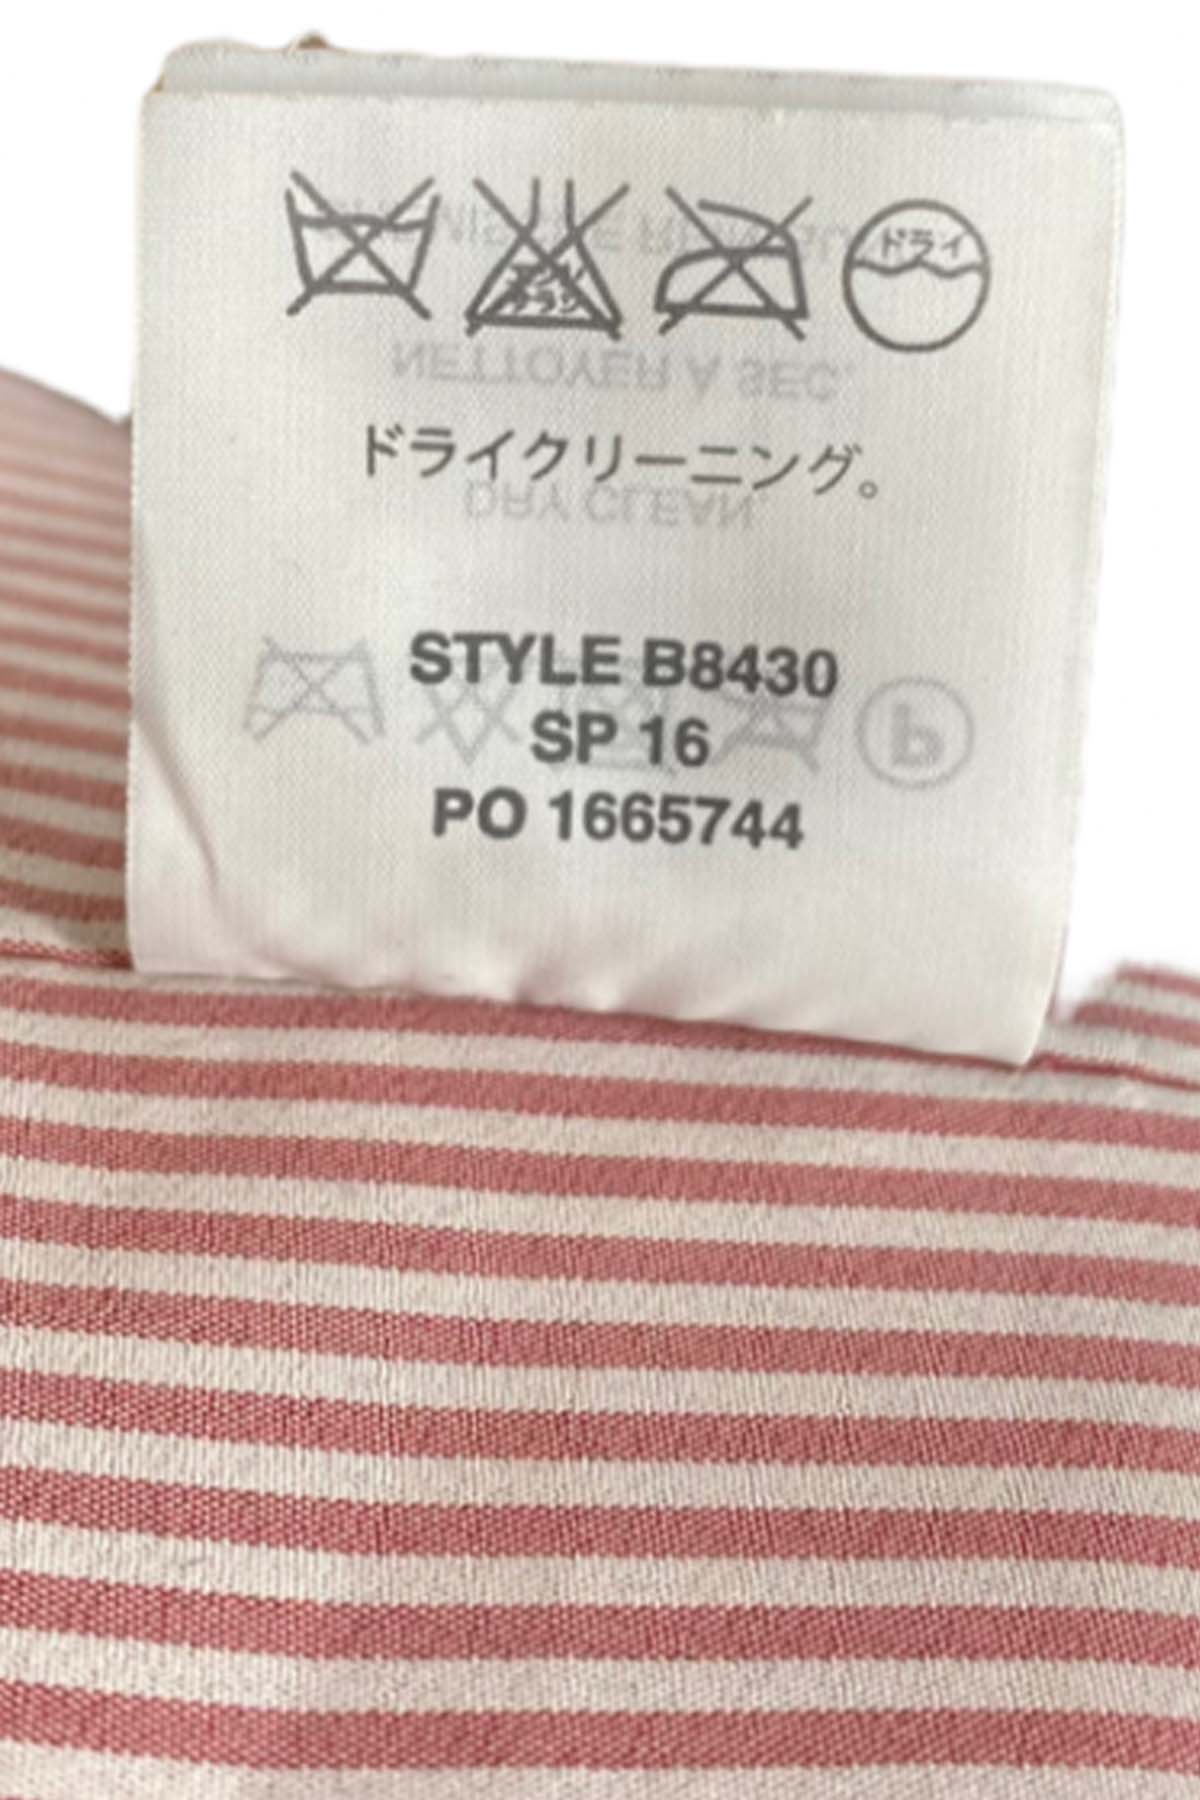 close up of a j crew style number tag.